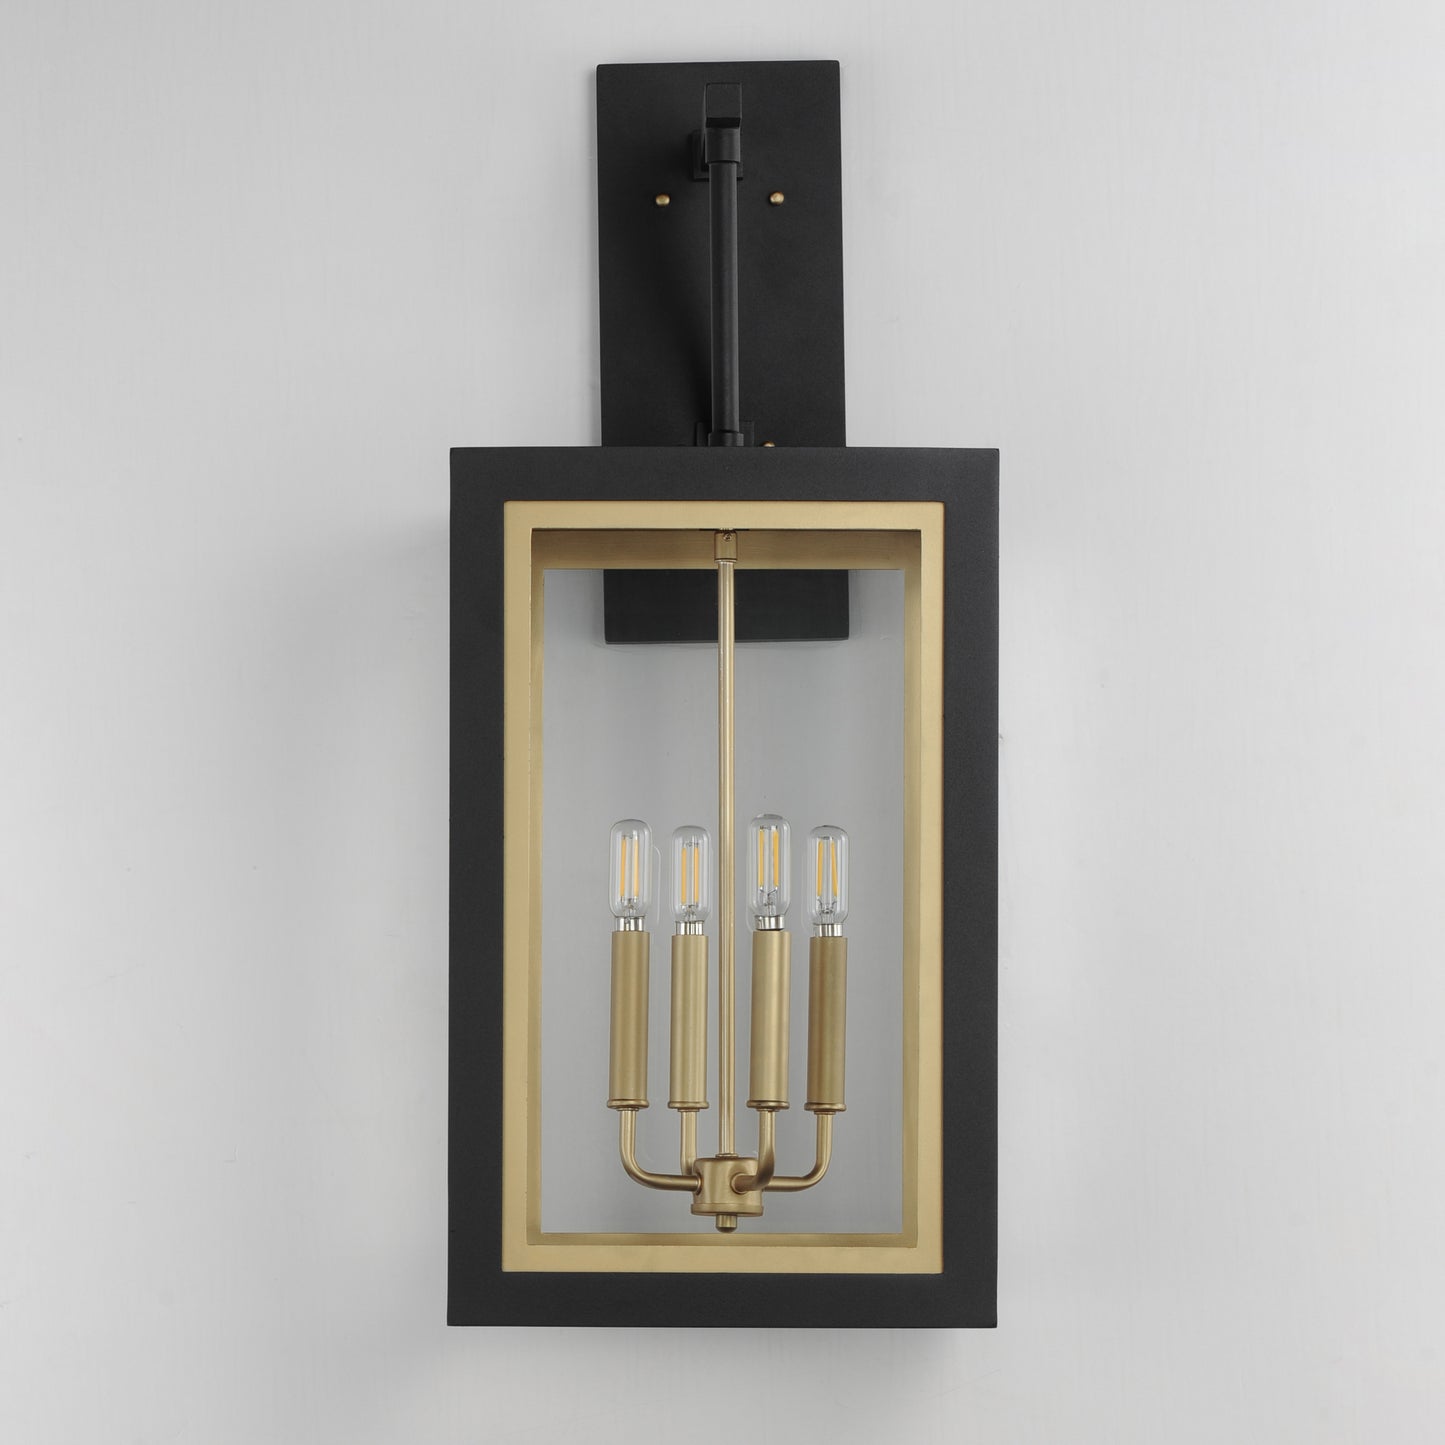 30056CLBKGLD - Neoclass 29" Outdoor Wall Sconce - Black / Gold